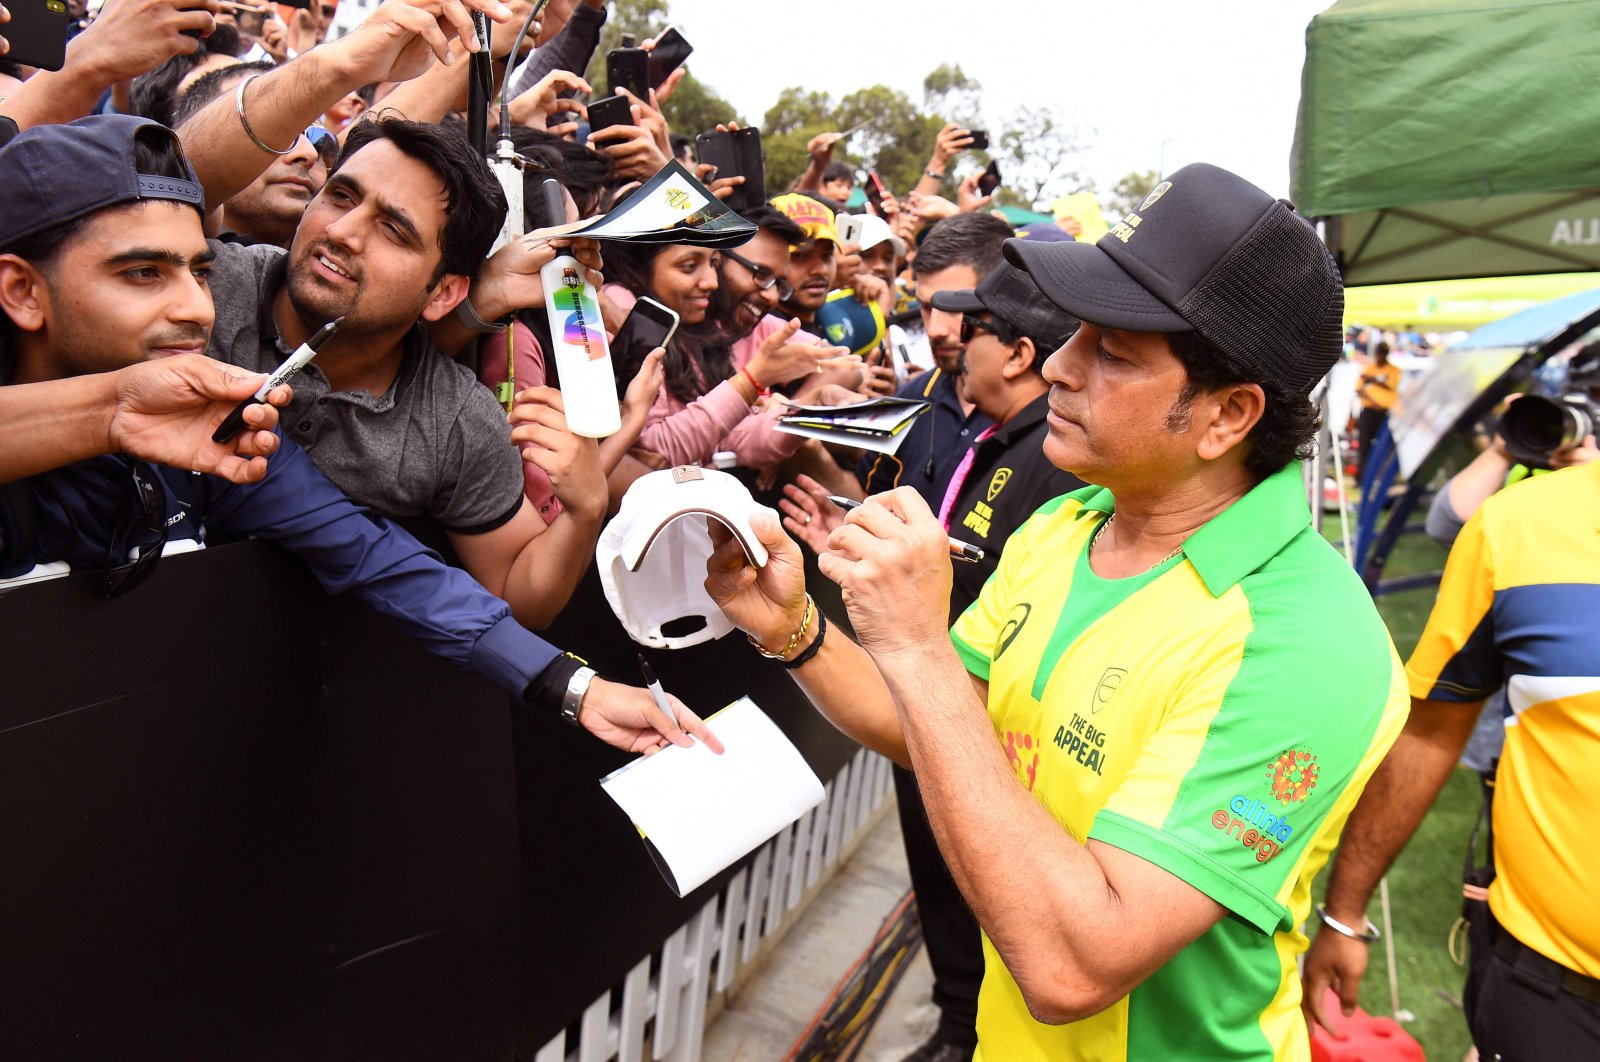 Former Indian player Sachin Tendulkar (R) signs autographs during a celebrity cricket match to raise funds for people affected by the Australian bushfires, in Melbourne, Australia, Feb. 9, 2020 (AFP Photo)